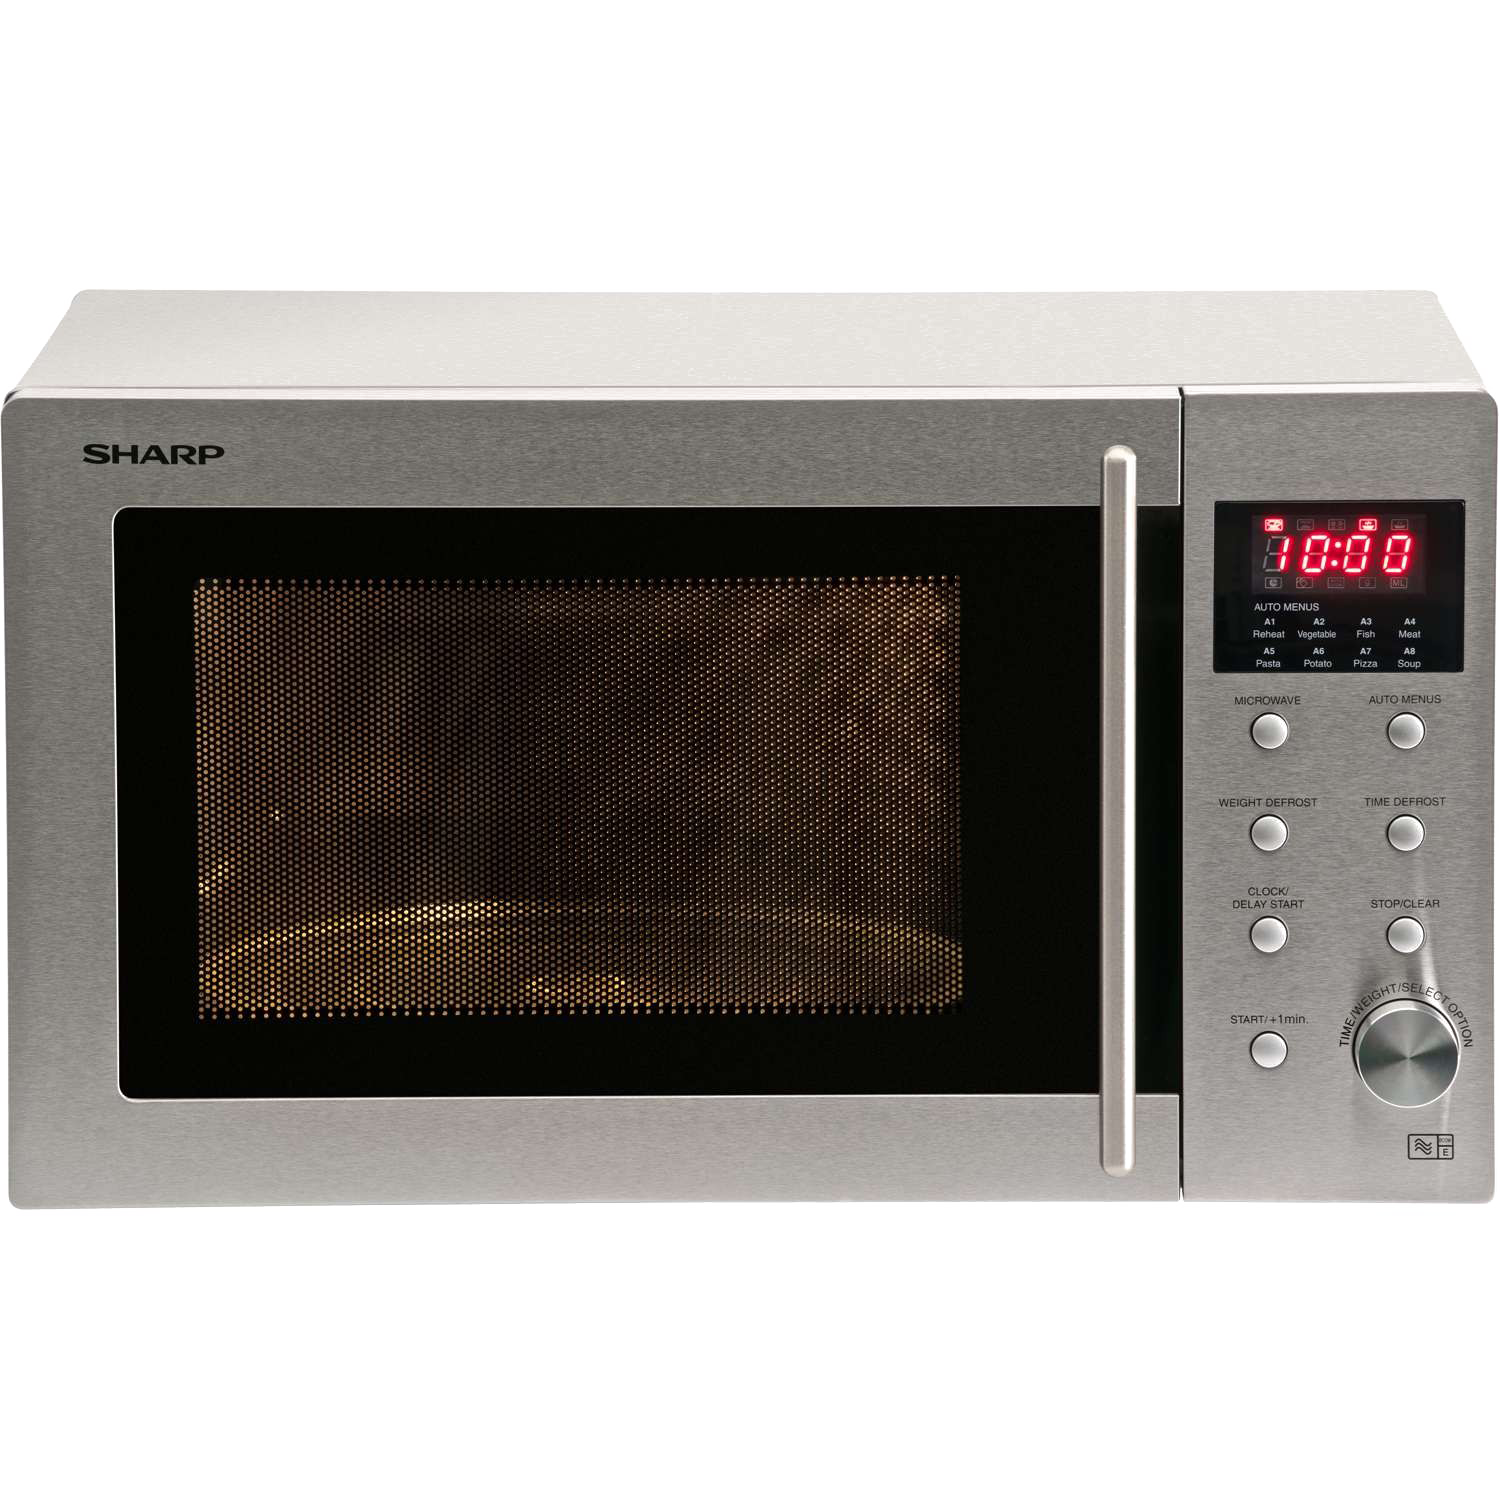 Oven microwave stainless steel Transparan